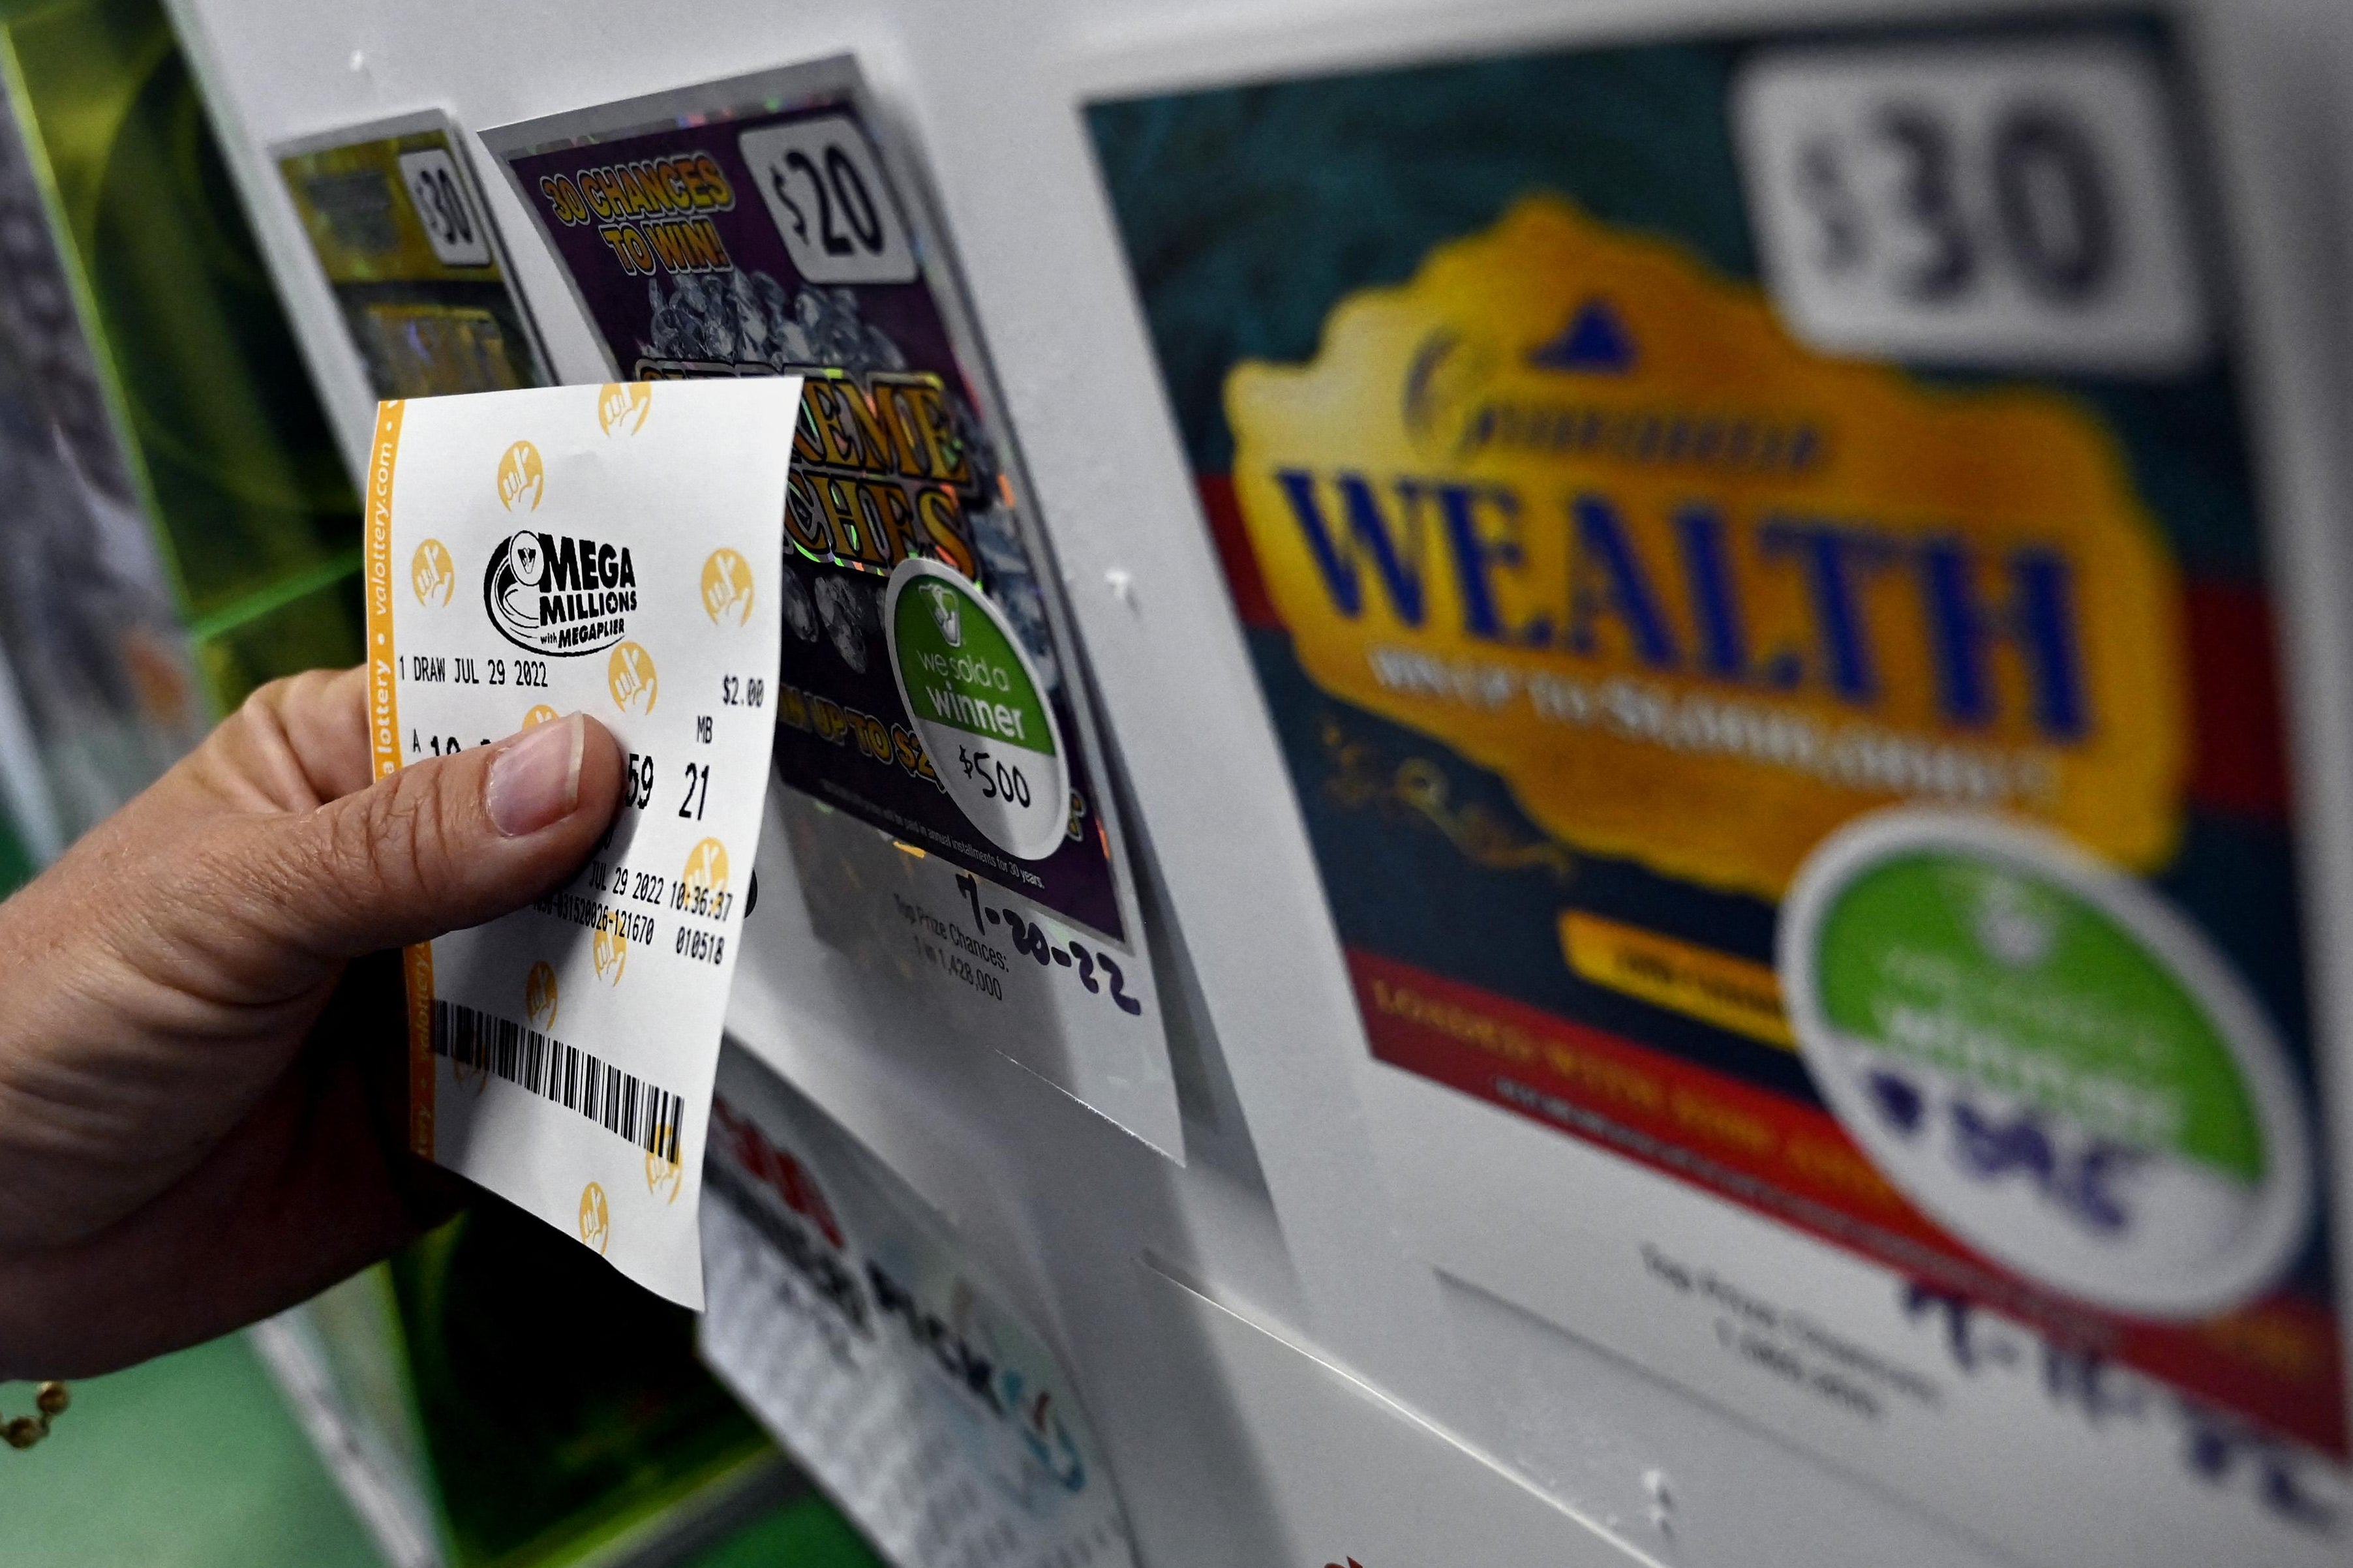 A person buys a Mega Millions lottery ticket at a store on July 29, 2022 in Arlington, Virginia. - The jackpot for Friday's Mega Millions is now $1.1 billion, the second-largest jackpot in game history. (Photo by OLIVIER DOULIERY / AFP) (Photo by OLIVIER DOULIERY/AFP via Getty Images)